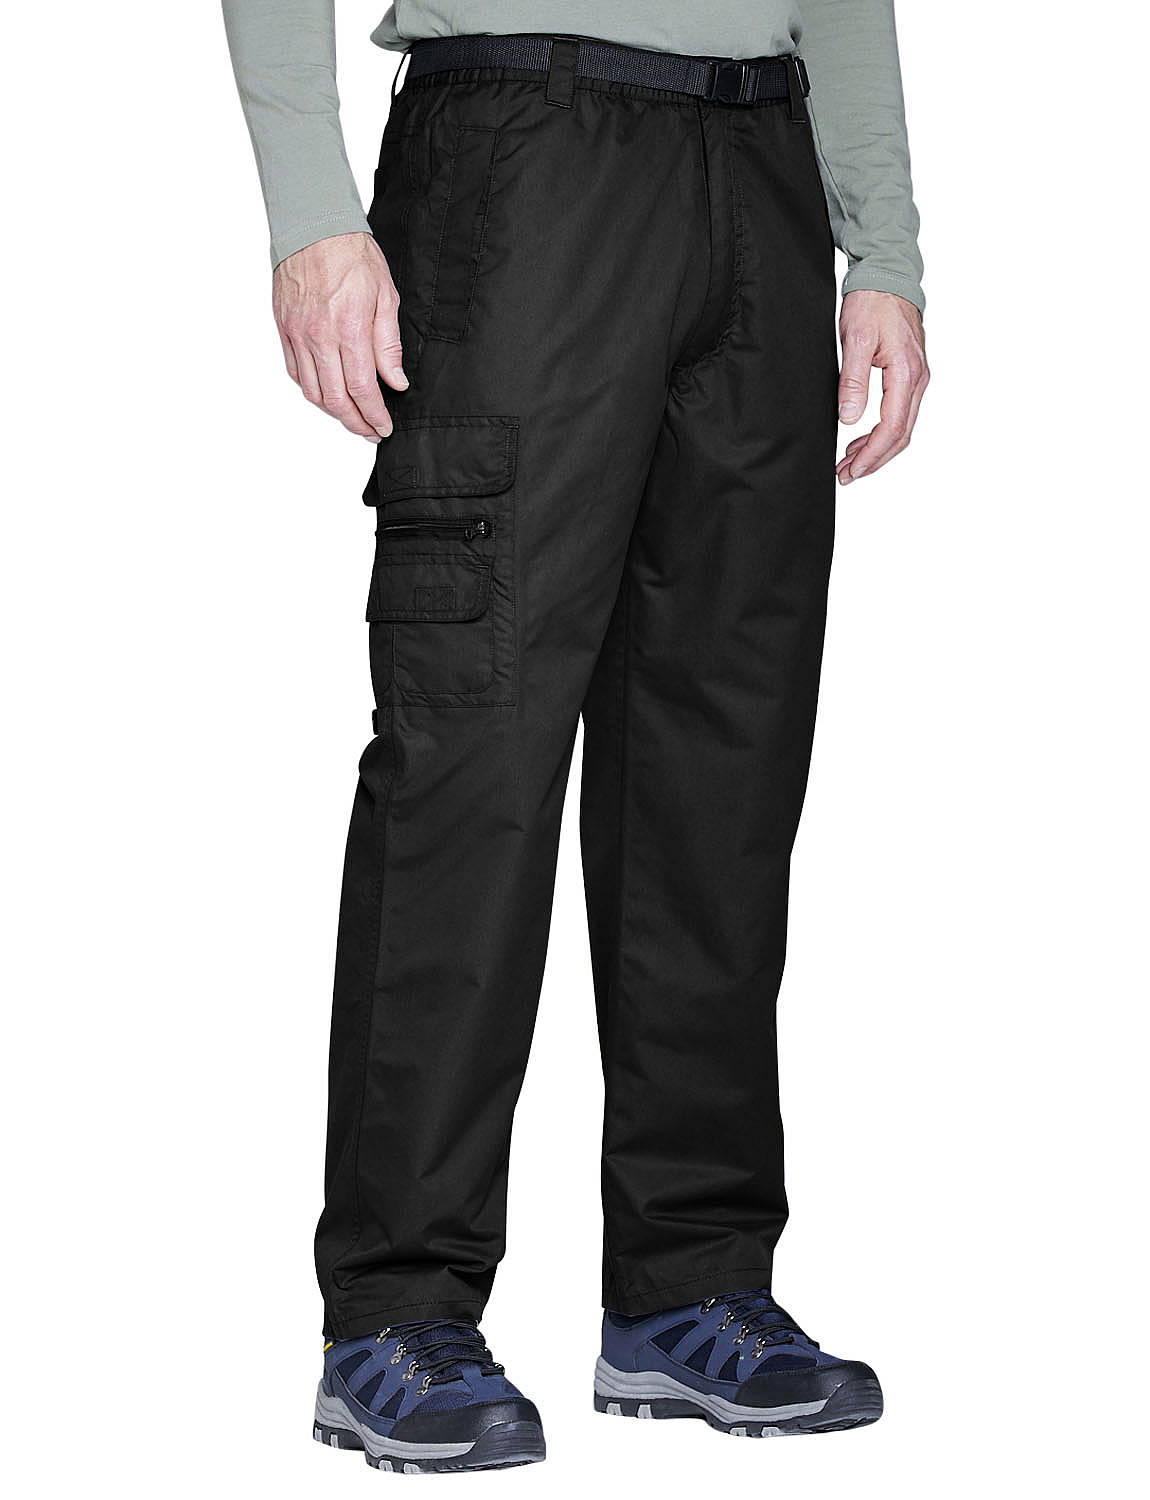 Details more than 90 mens thermal lined trousers super hot - in.cdgdbentre